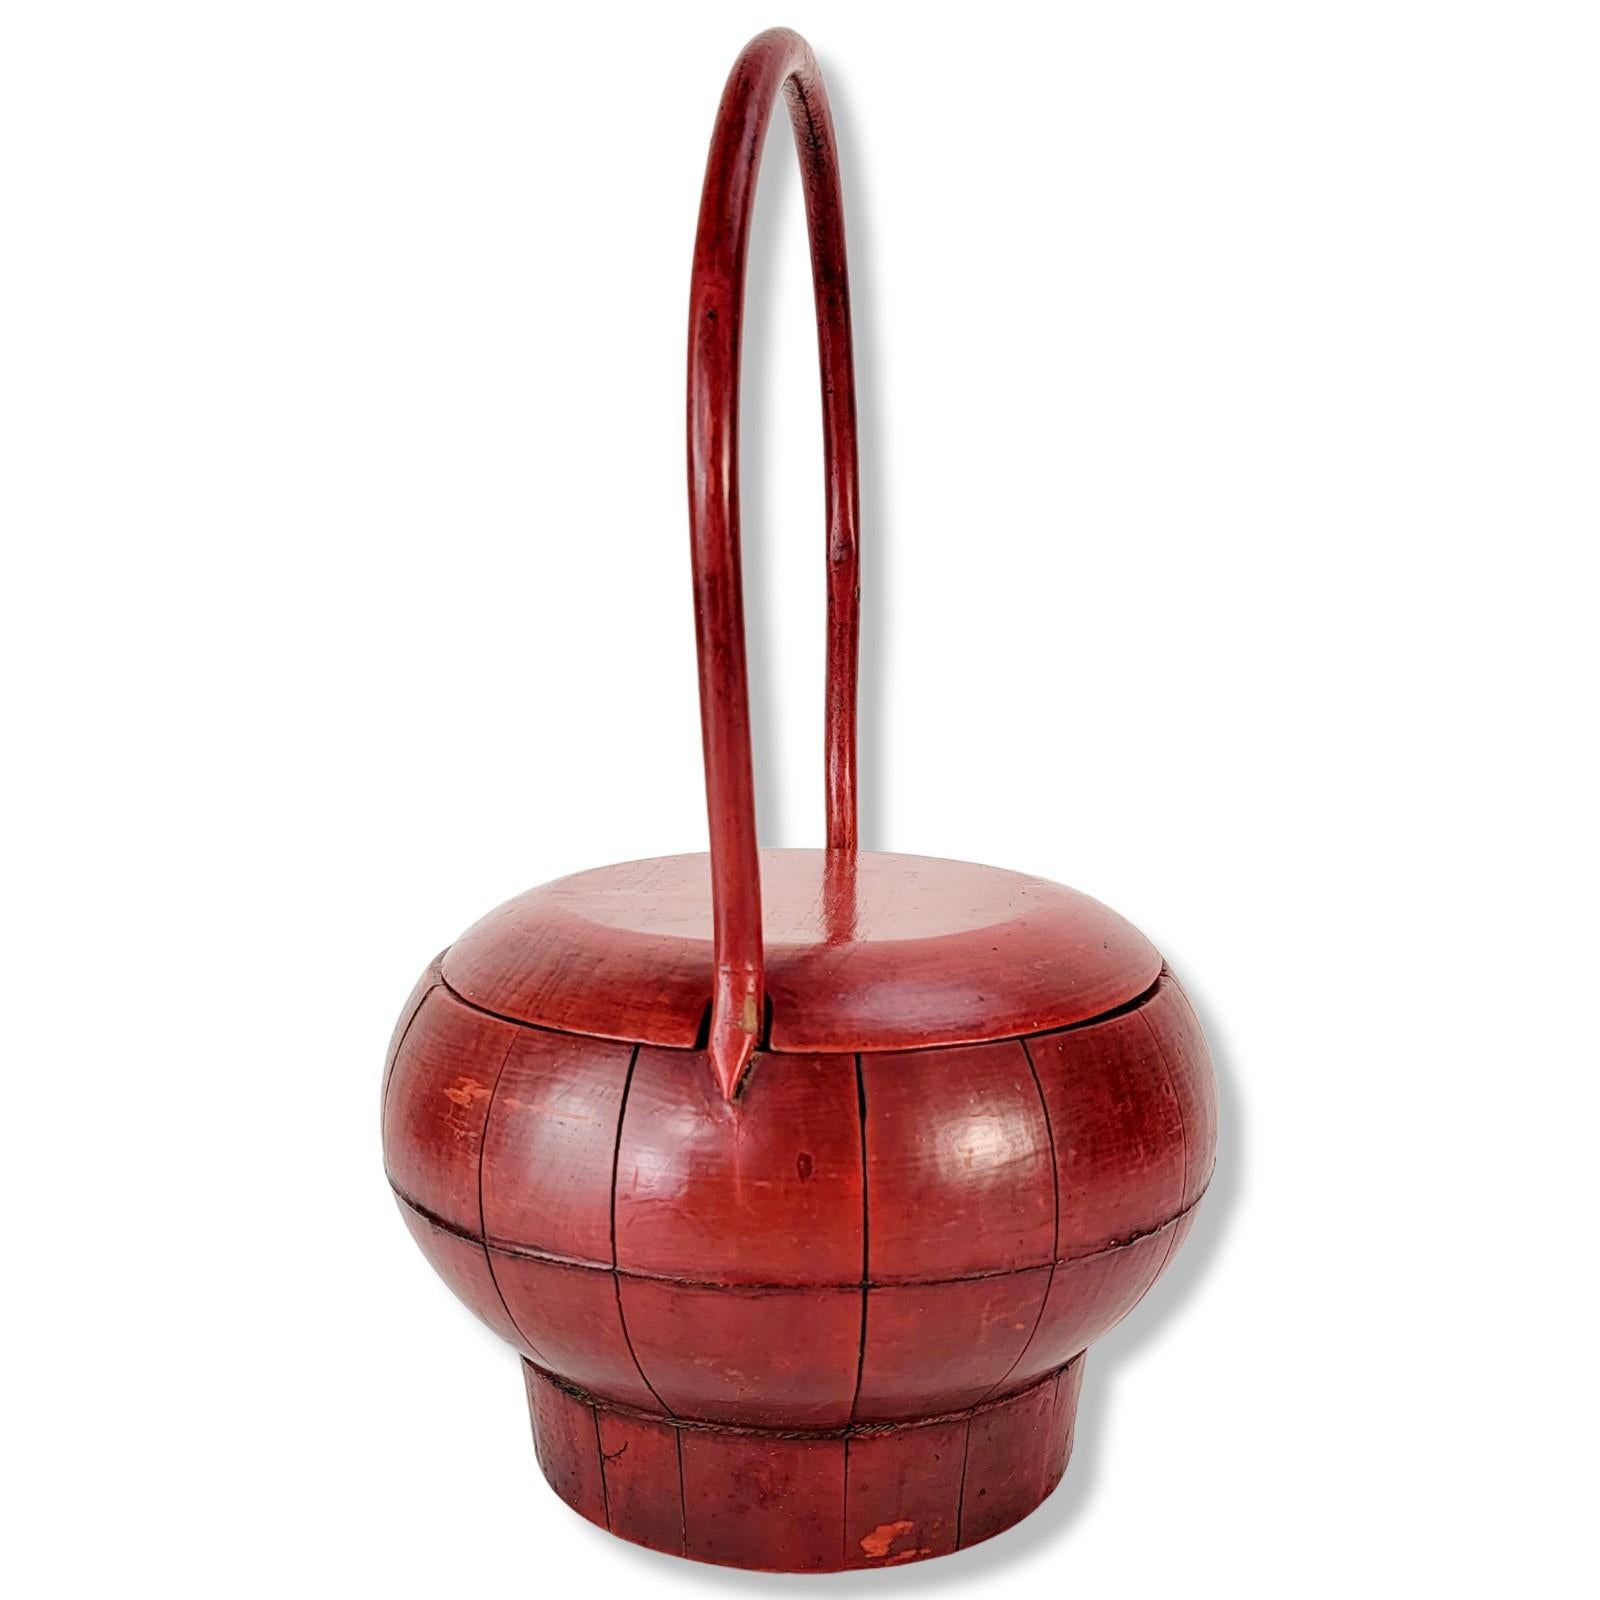 An elegant antique basket from southern China. Such a basket was used in the 19th century China to store and carry auspicious fruits and foods for weddings. Red lacquer symbolizes good luck and great fortune. Choice wood panels were hand cut and